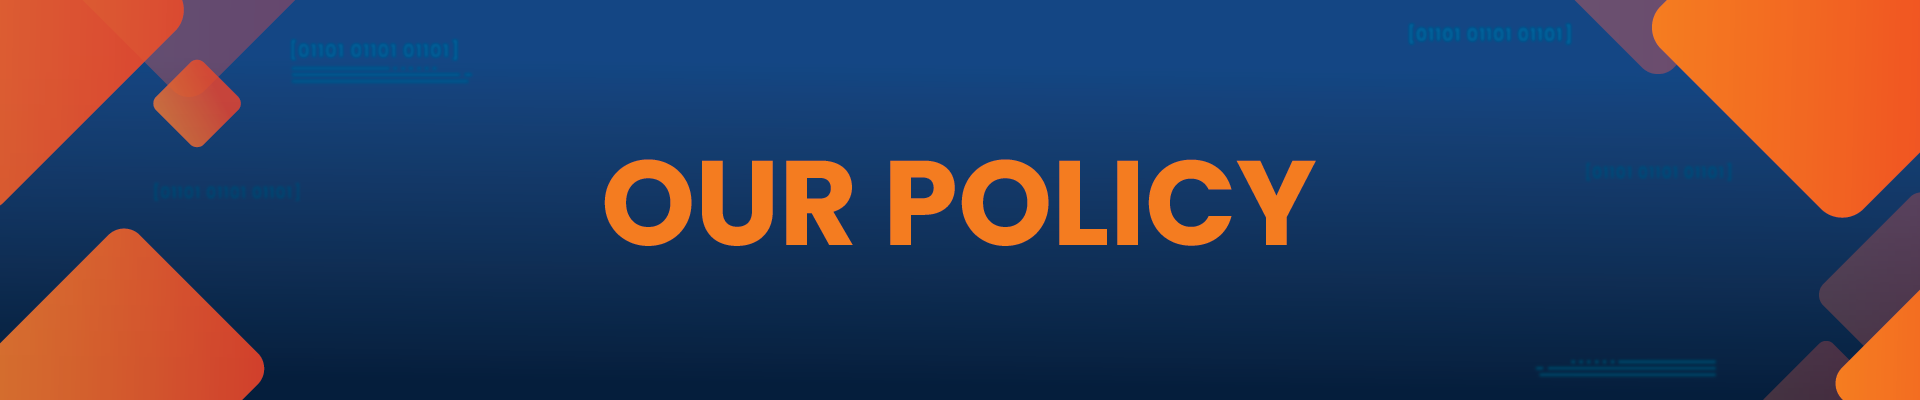 policy-banner